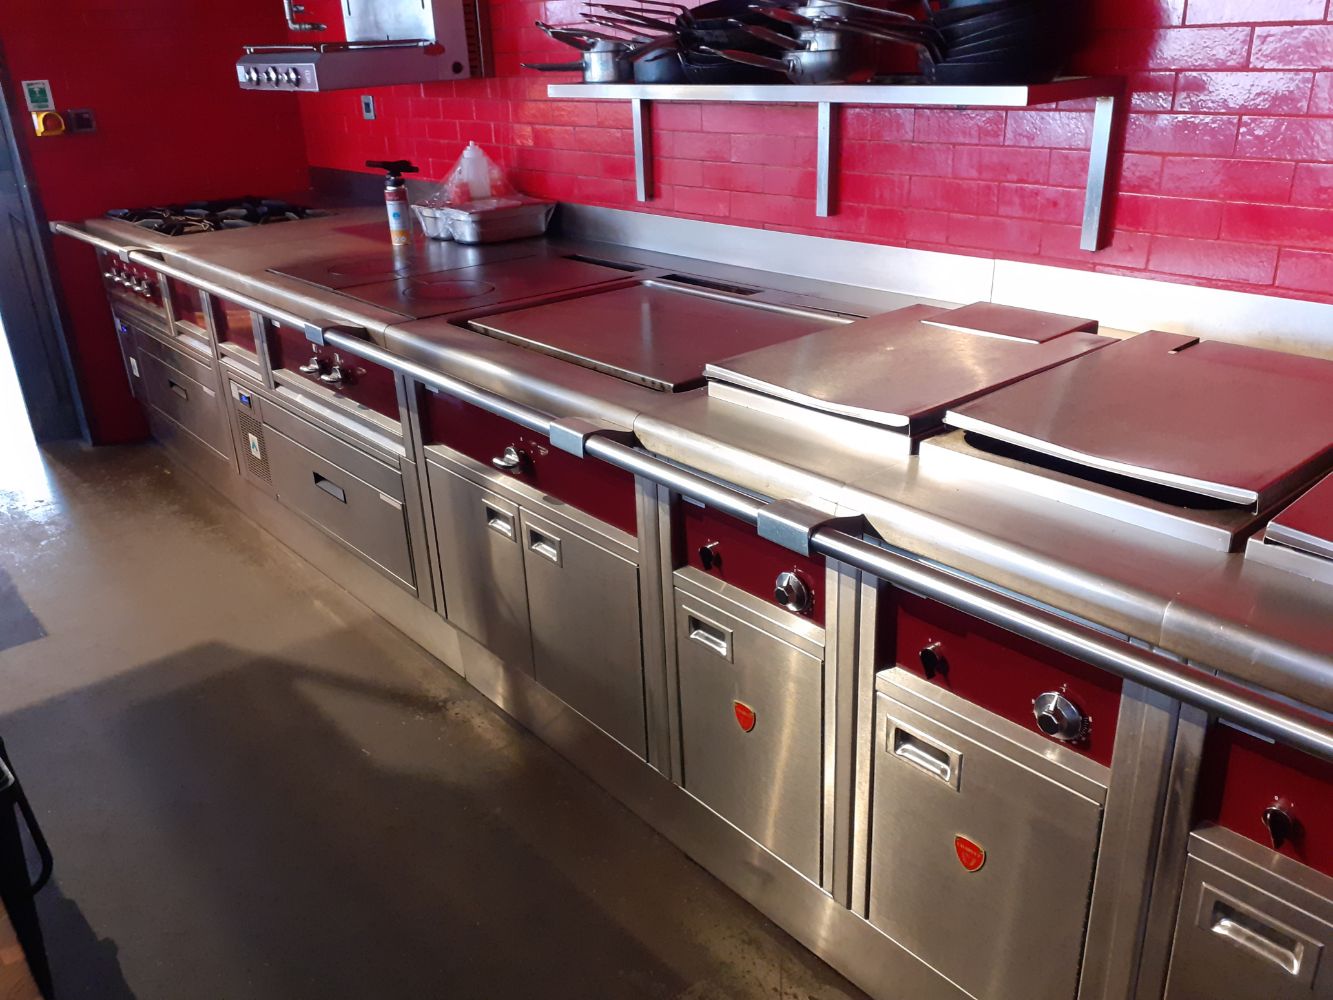 Range of Good Quality Catering Equipment and Restaurant Furnishings (Installed 2017)